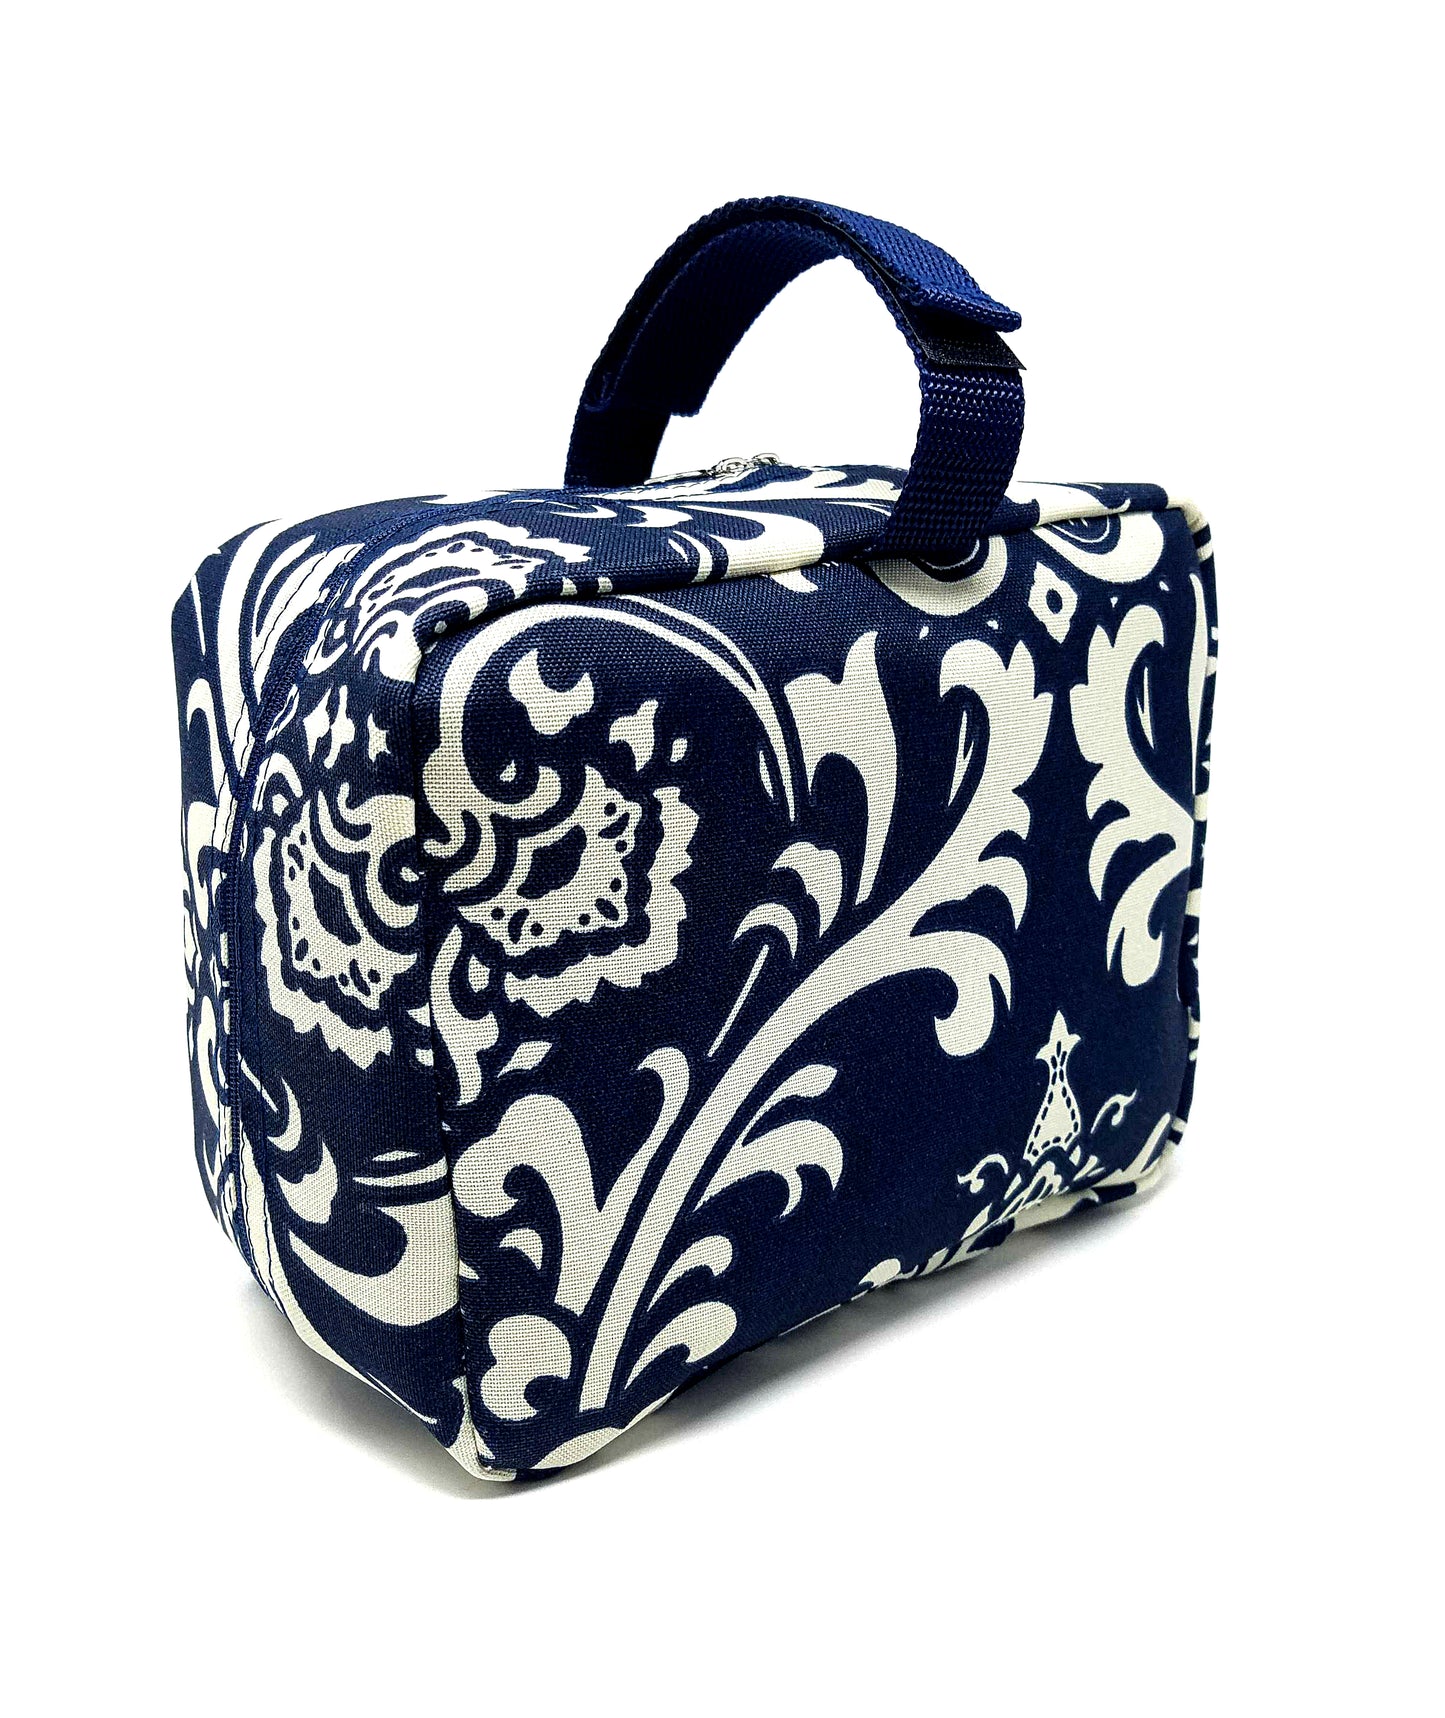 Just In Case™ Bordeaux Travel Medicine/Toiletry Pouch